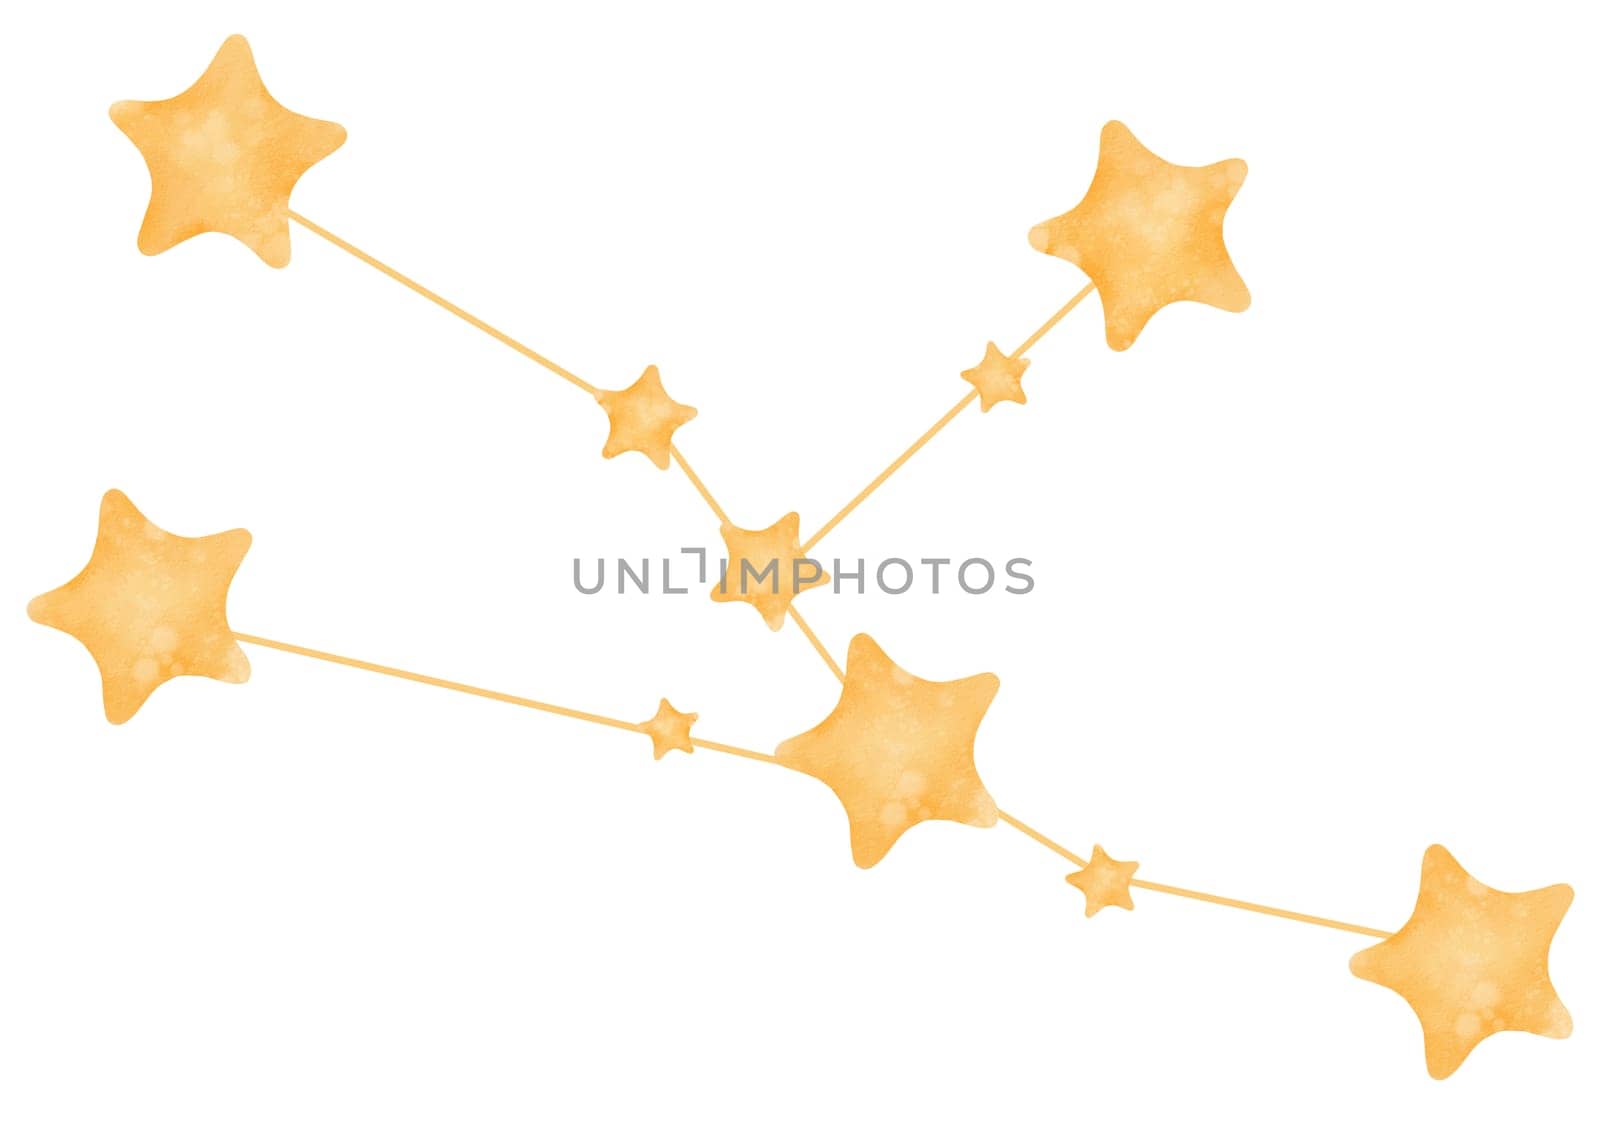 Watercolor Isolated Illustration of the Taurus Constellation, a Zodiac Sign. Bright, Luminous Stars in the Sky are a Constellation for Astronomy. for Horoscopes, Magazines, and Astrology. Mystique.